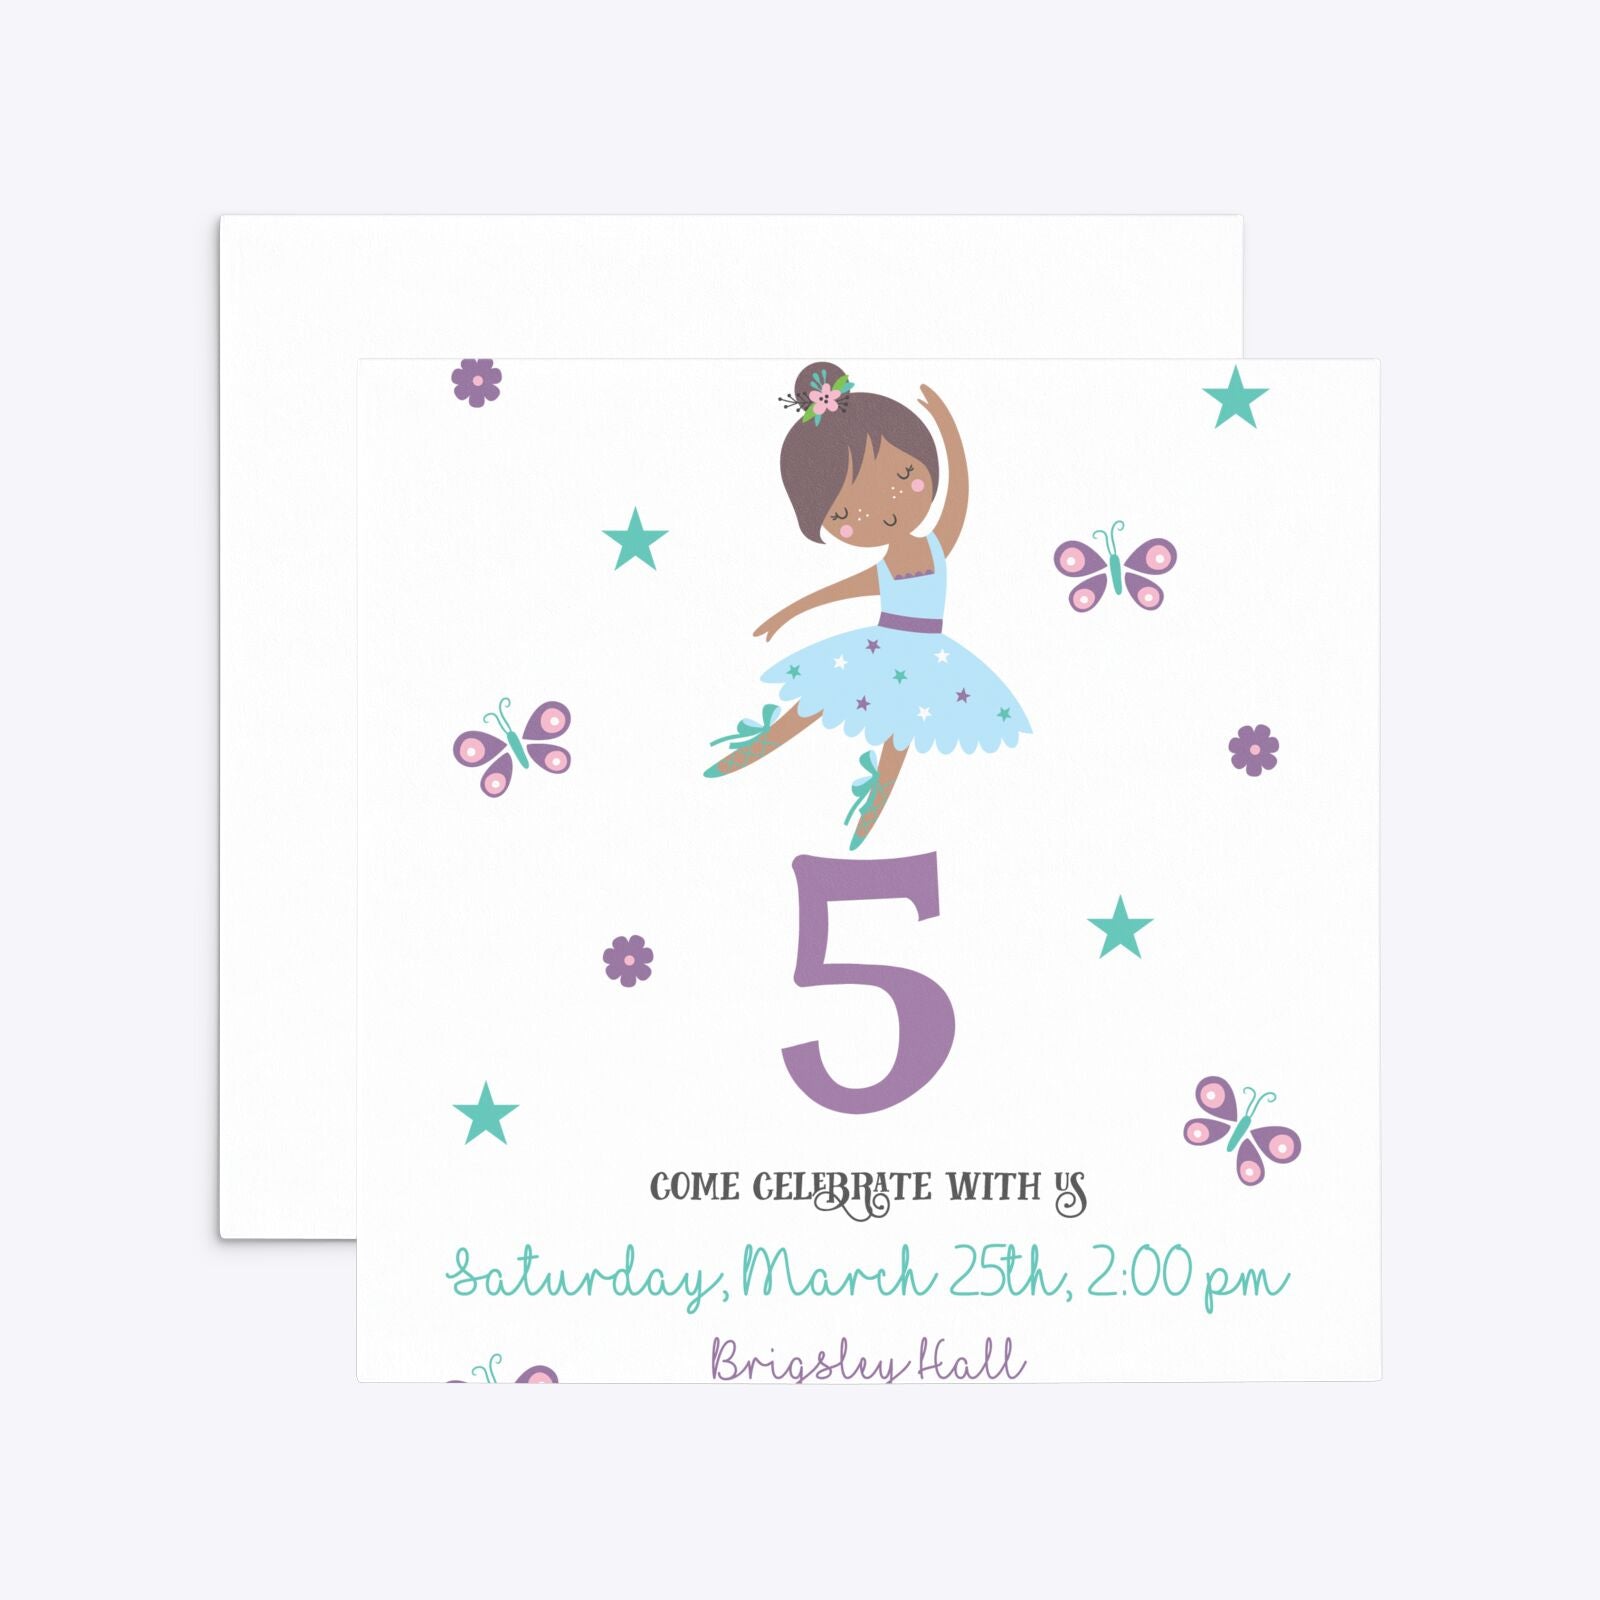 Ballerina Birthday Personalised Square 5 25x5 25 Invitation Matte Paper Front and Back Image